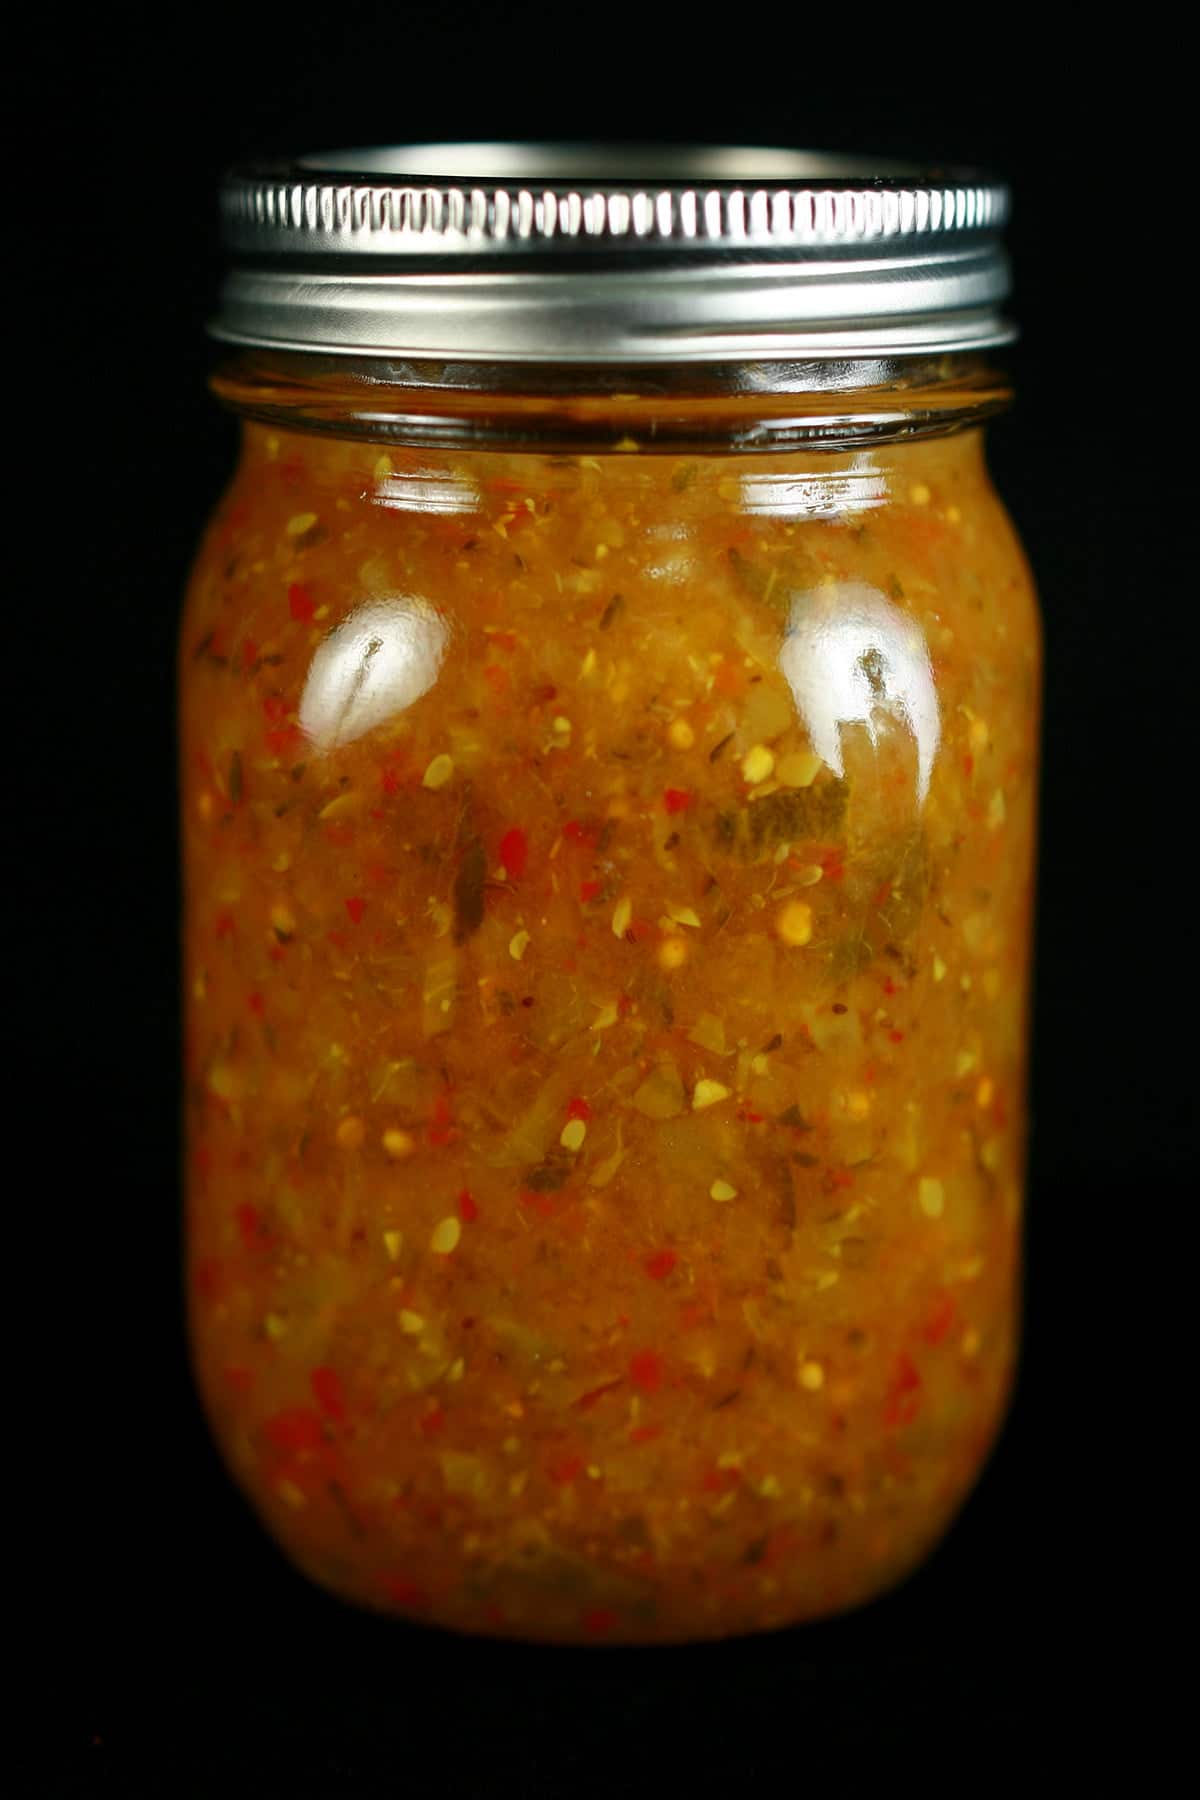 3 jars of Hoppy Dill Pickle Relish. It's a golden orange relish with flecks of dark green and red throughout.